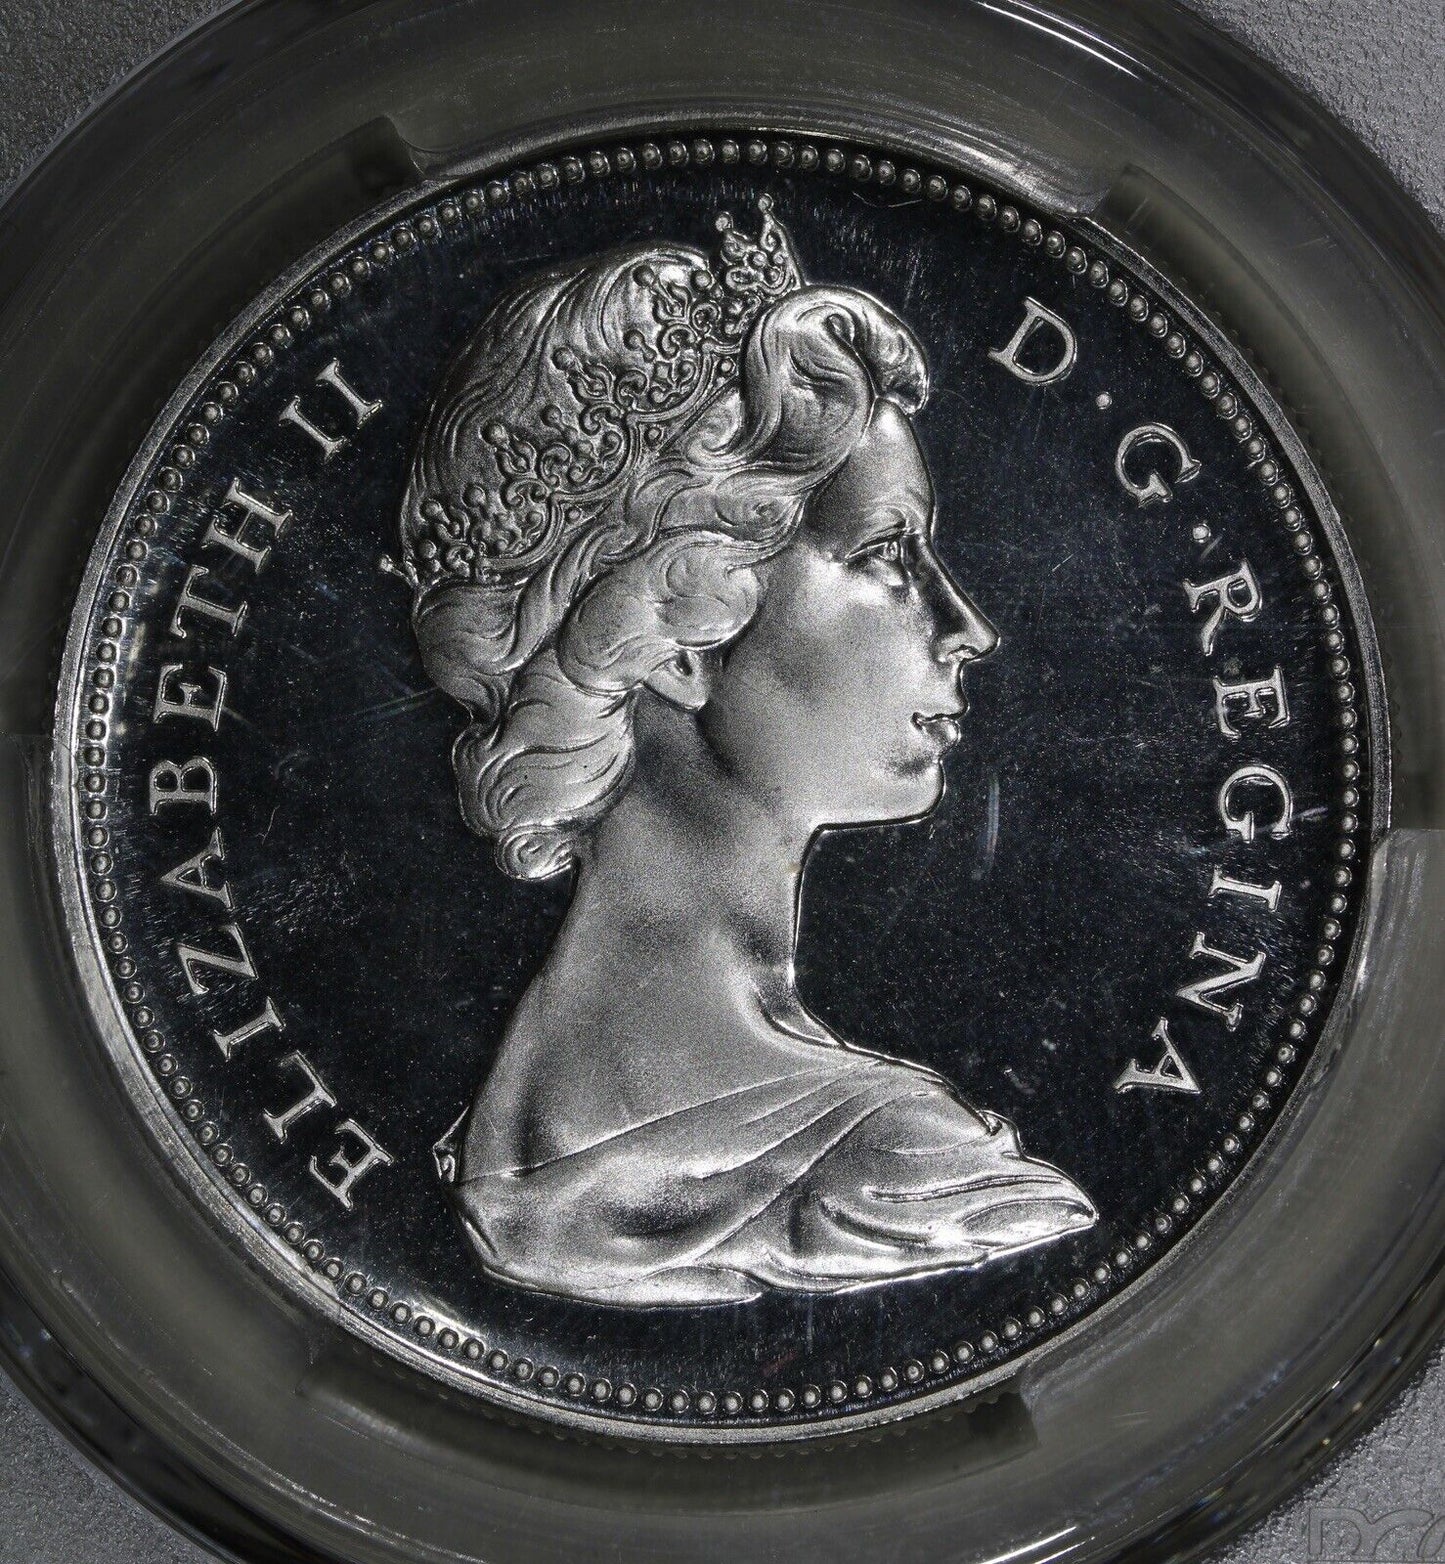 1967 Canada Silver Dollar PCGS PL67CAM Coin - Prooflike Cameo